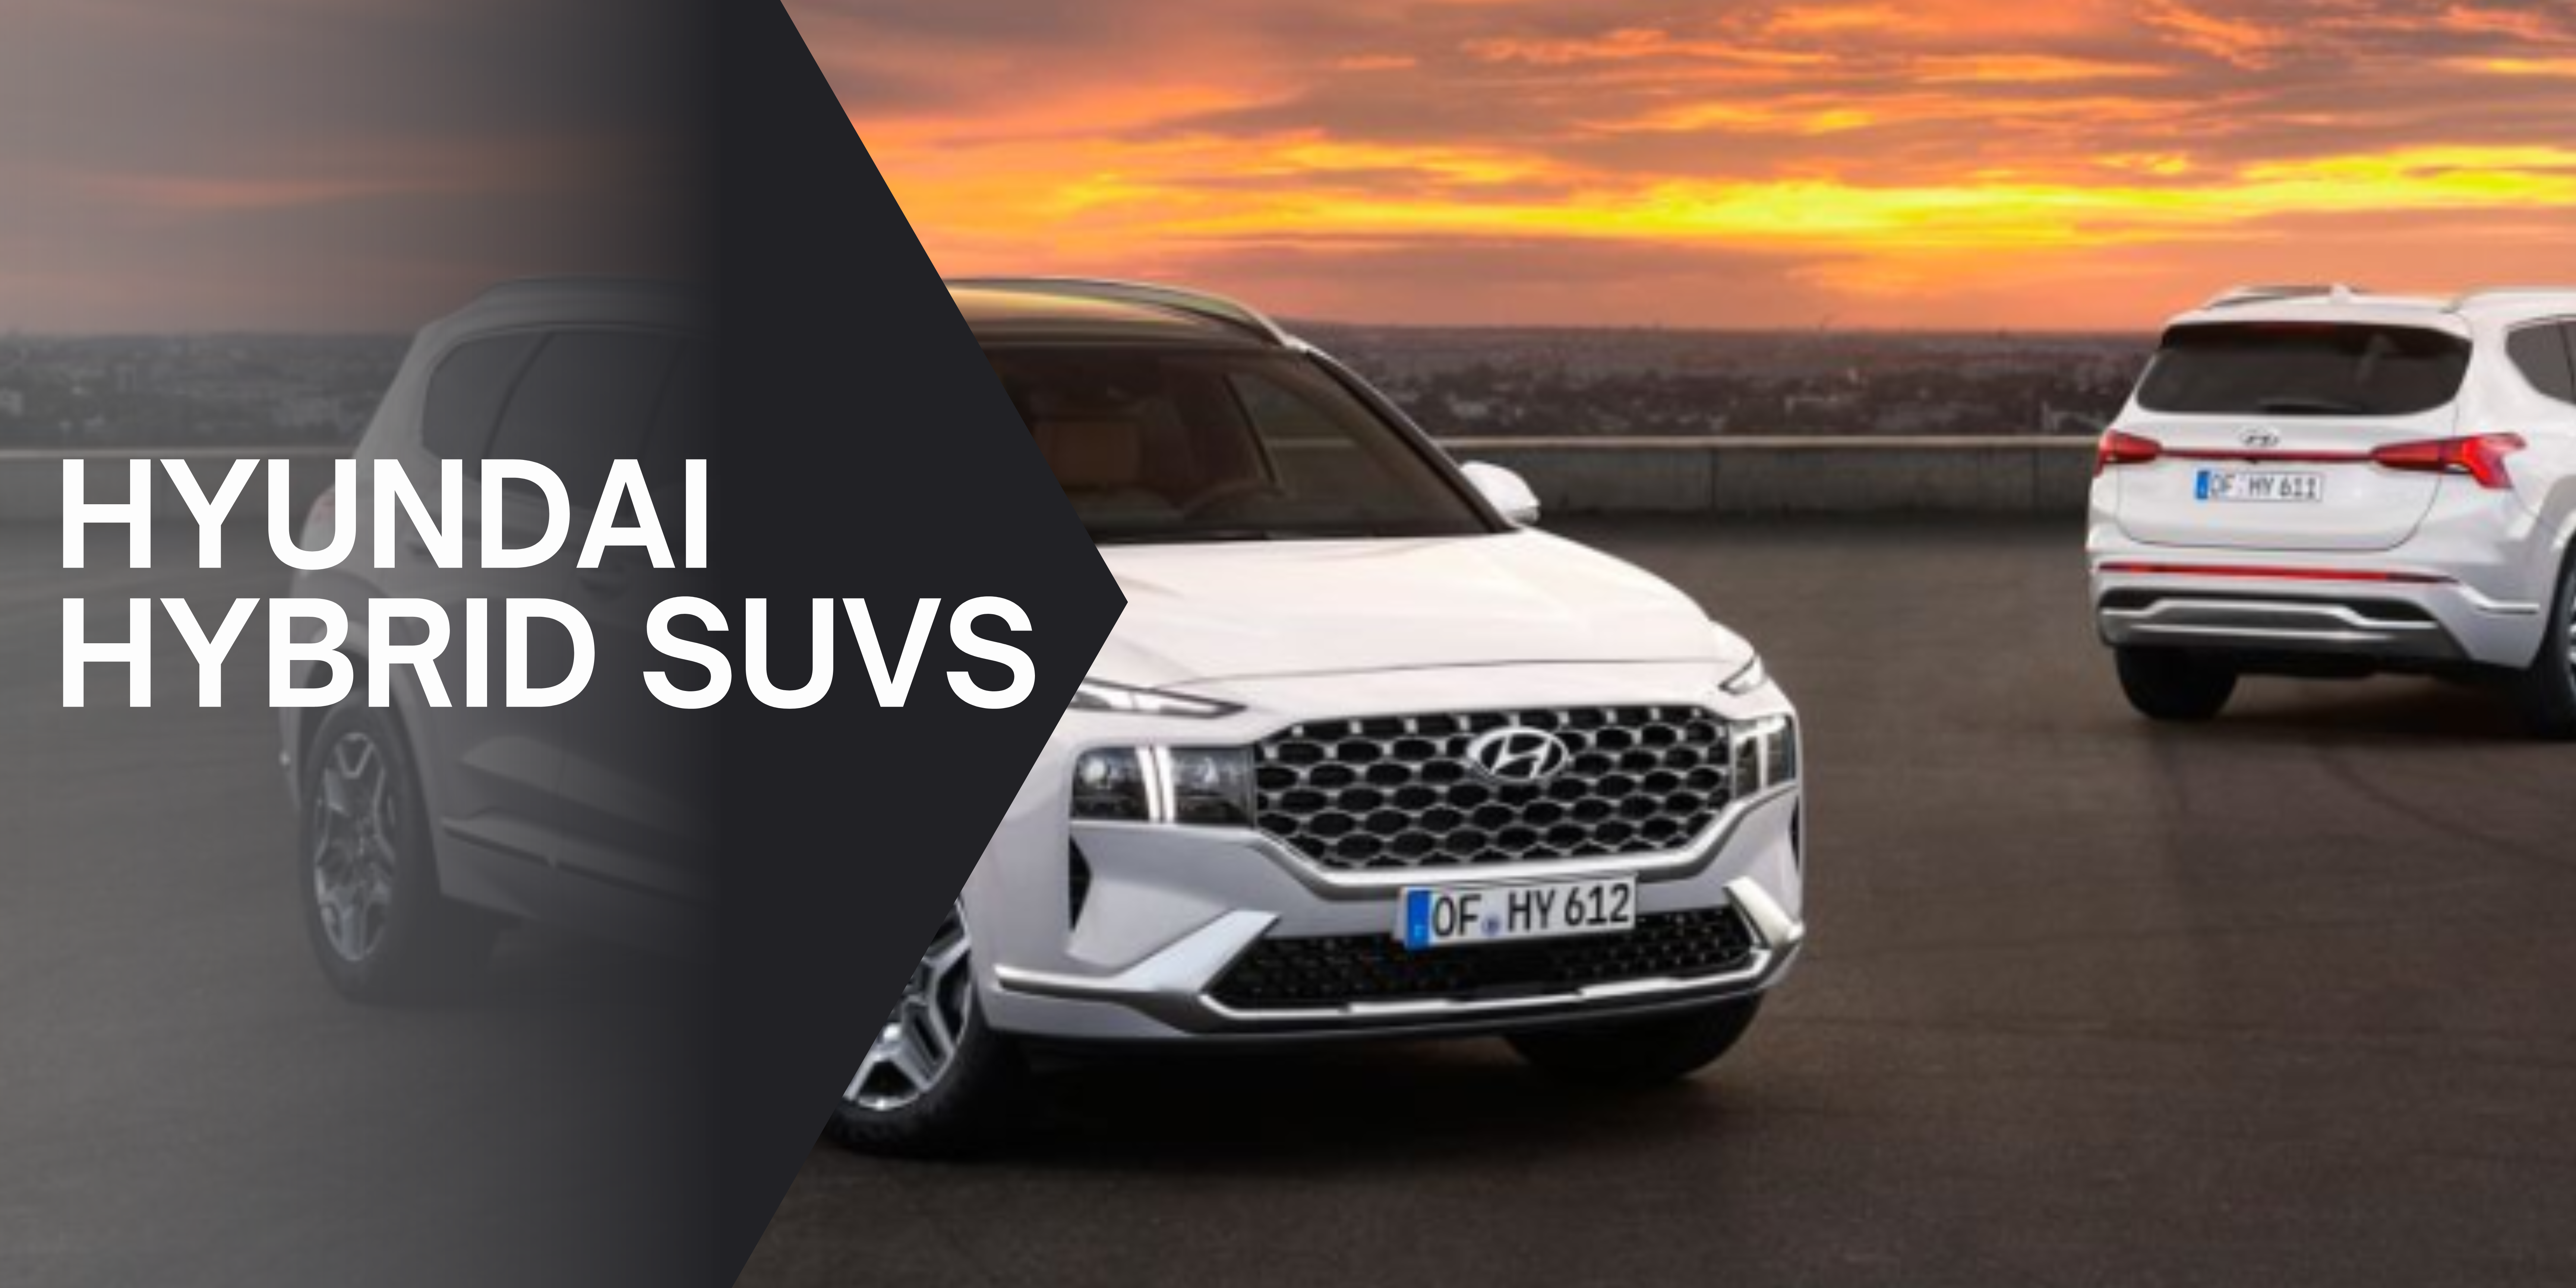 Hyundai Hybrid SUVs: The Best Options Available in the UK